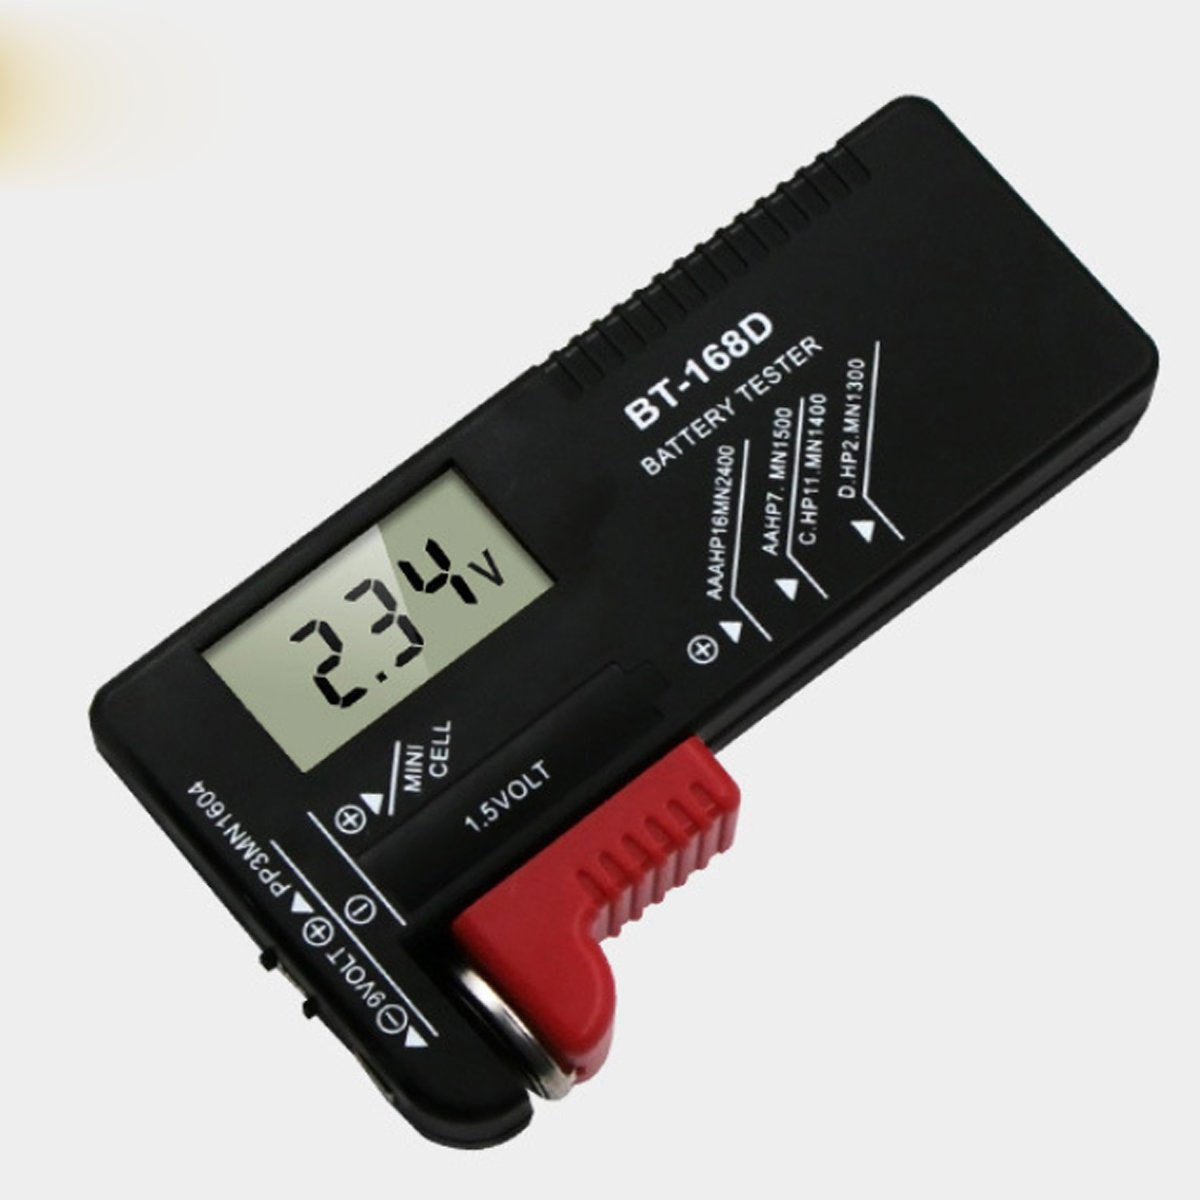 All-Rounder No Battery Needed Battery Tester